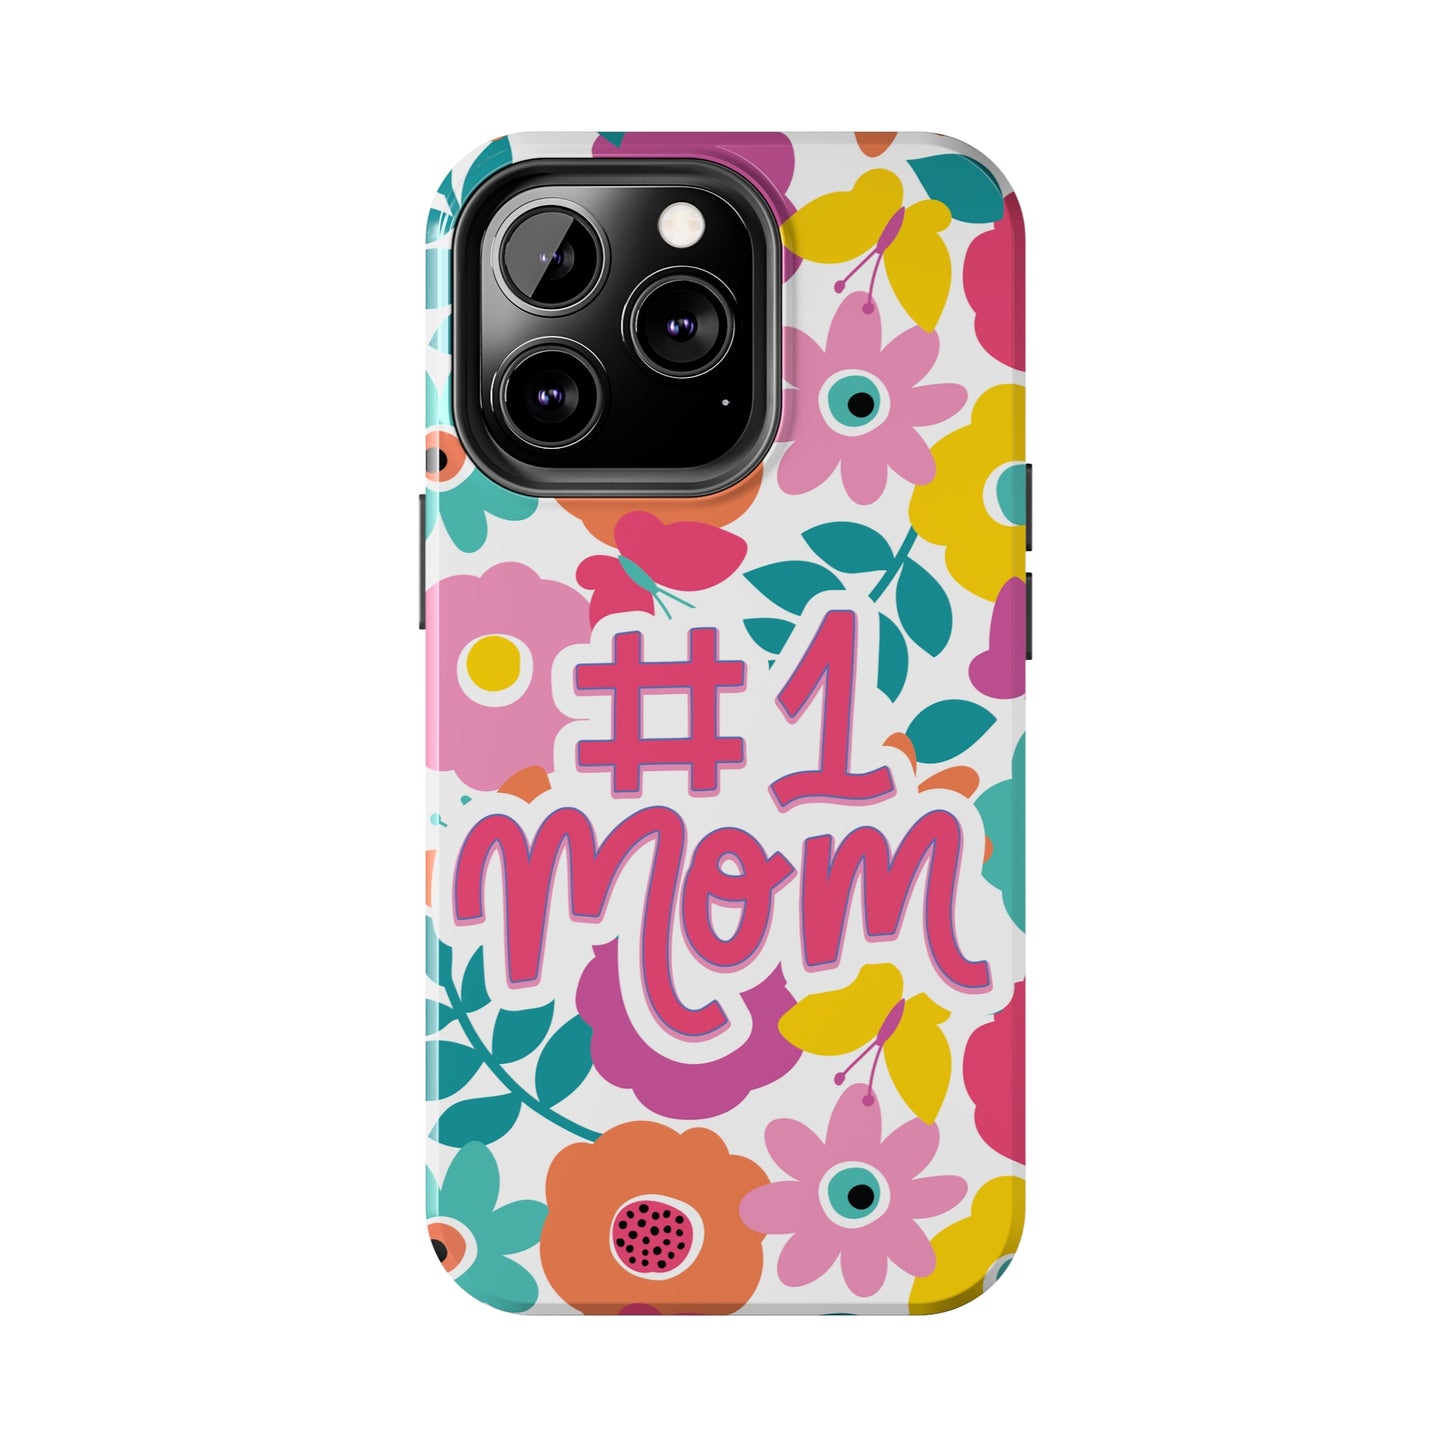 #1 Mom Floral Print Tough Phone Cases by Case-Mate, Mothers Day Gift